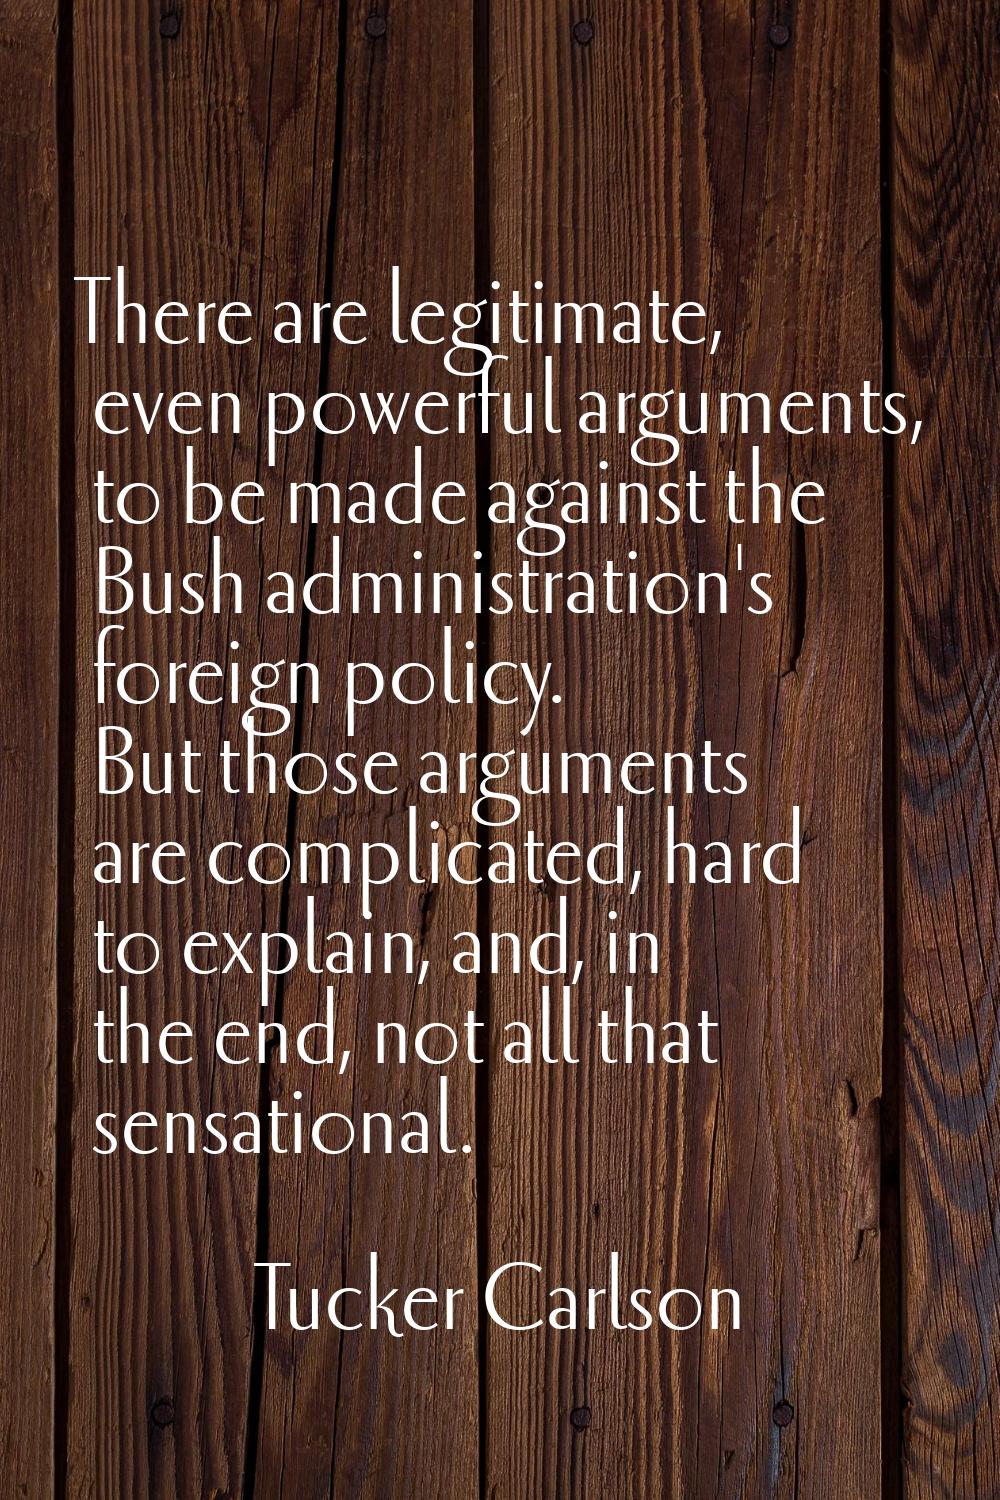 There are legitimate, even powerful arguments, to be made against the Bush administration's foreign